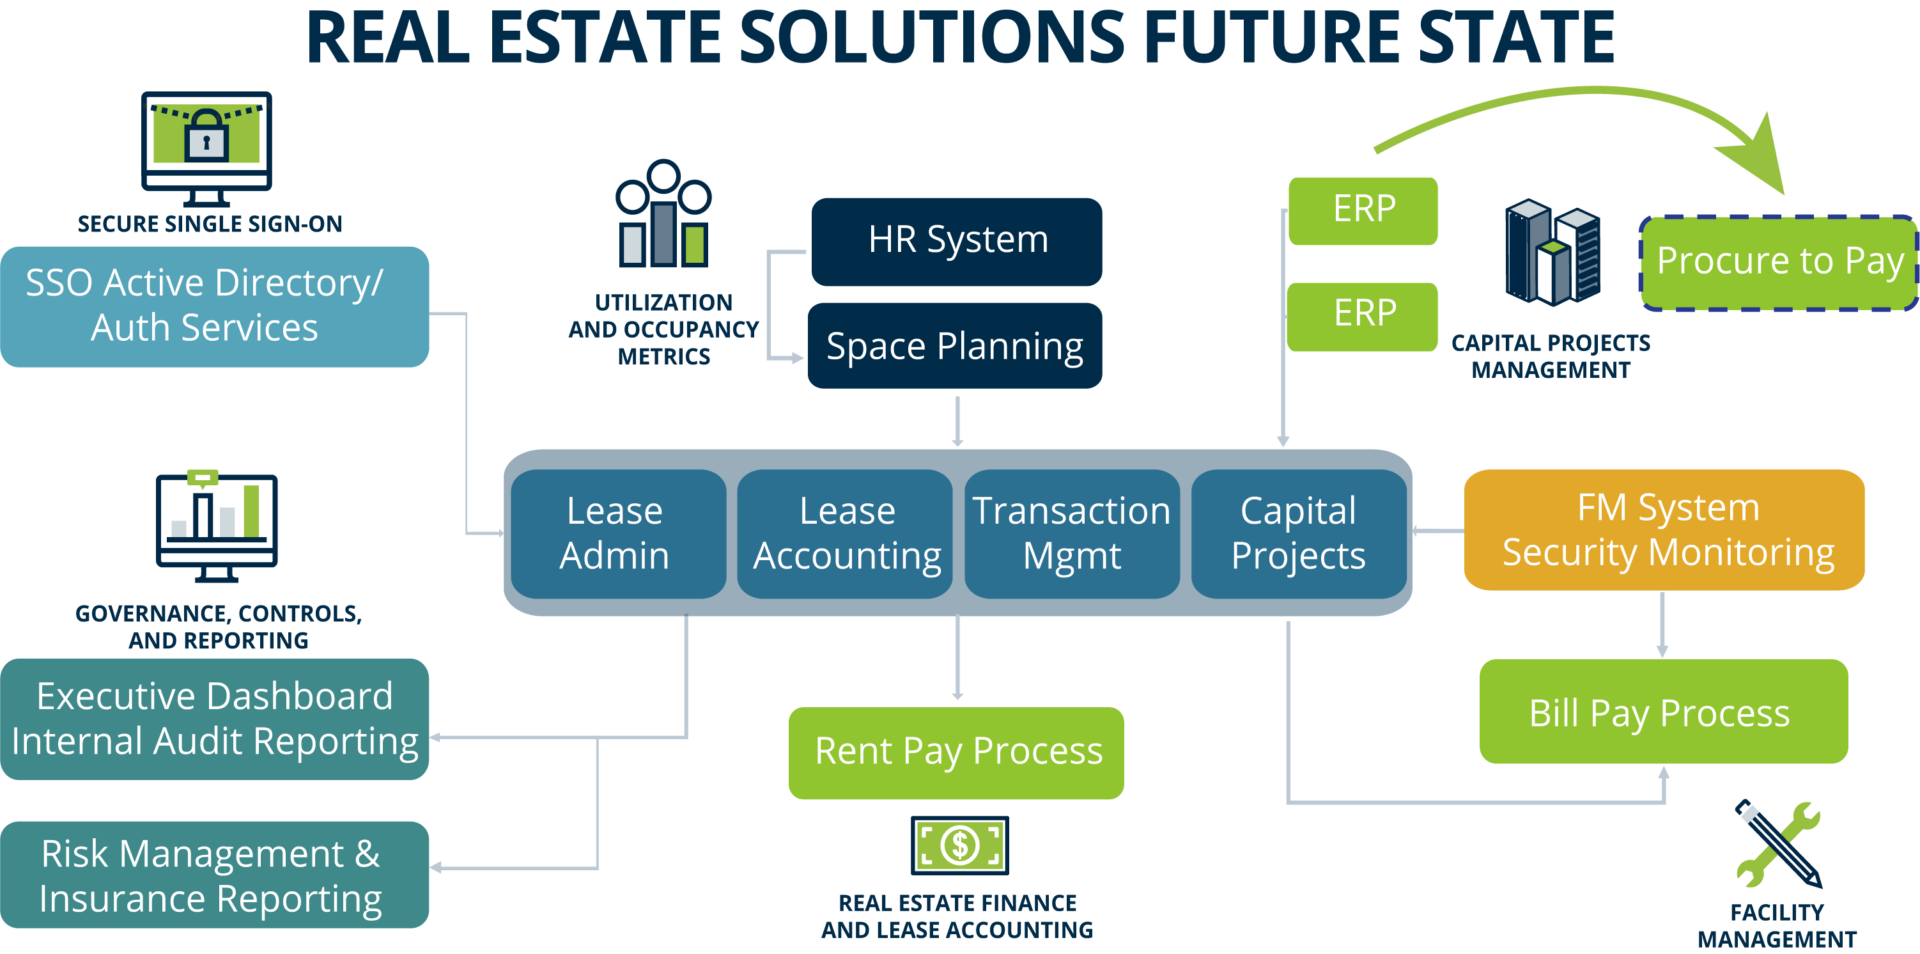 Real Estate Solutions Future State